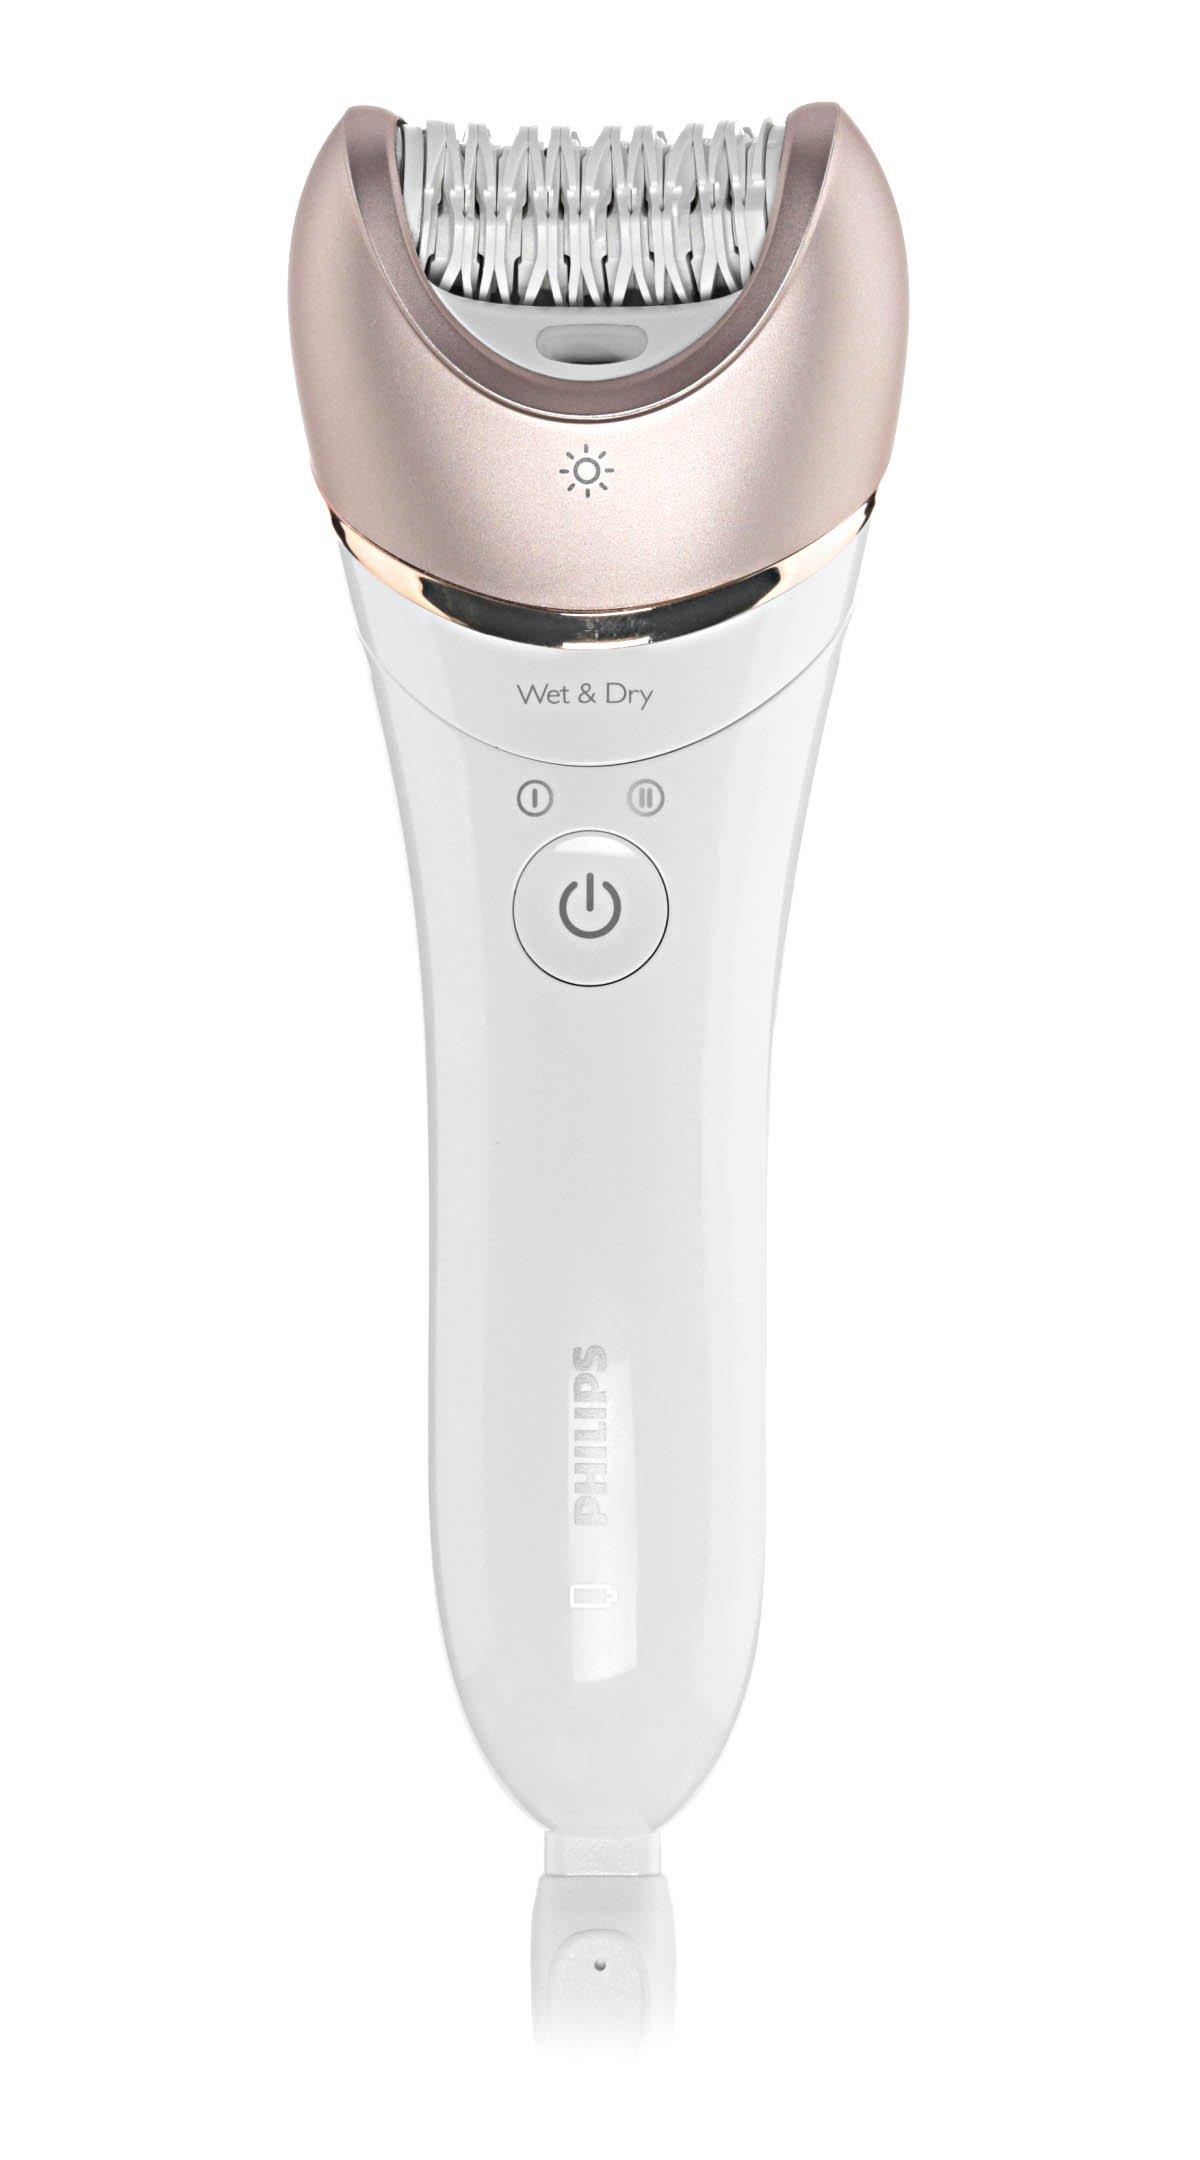 decide Tactile sense the snow's Philips Satinelle Prestige Wet and Dry Epilator. Ceramic Disc, Cordless,  Rechargeable - eXtra Bahrain